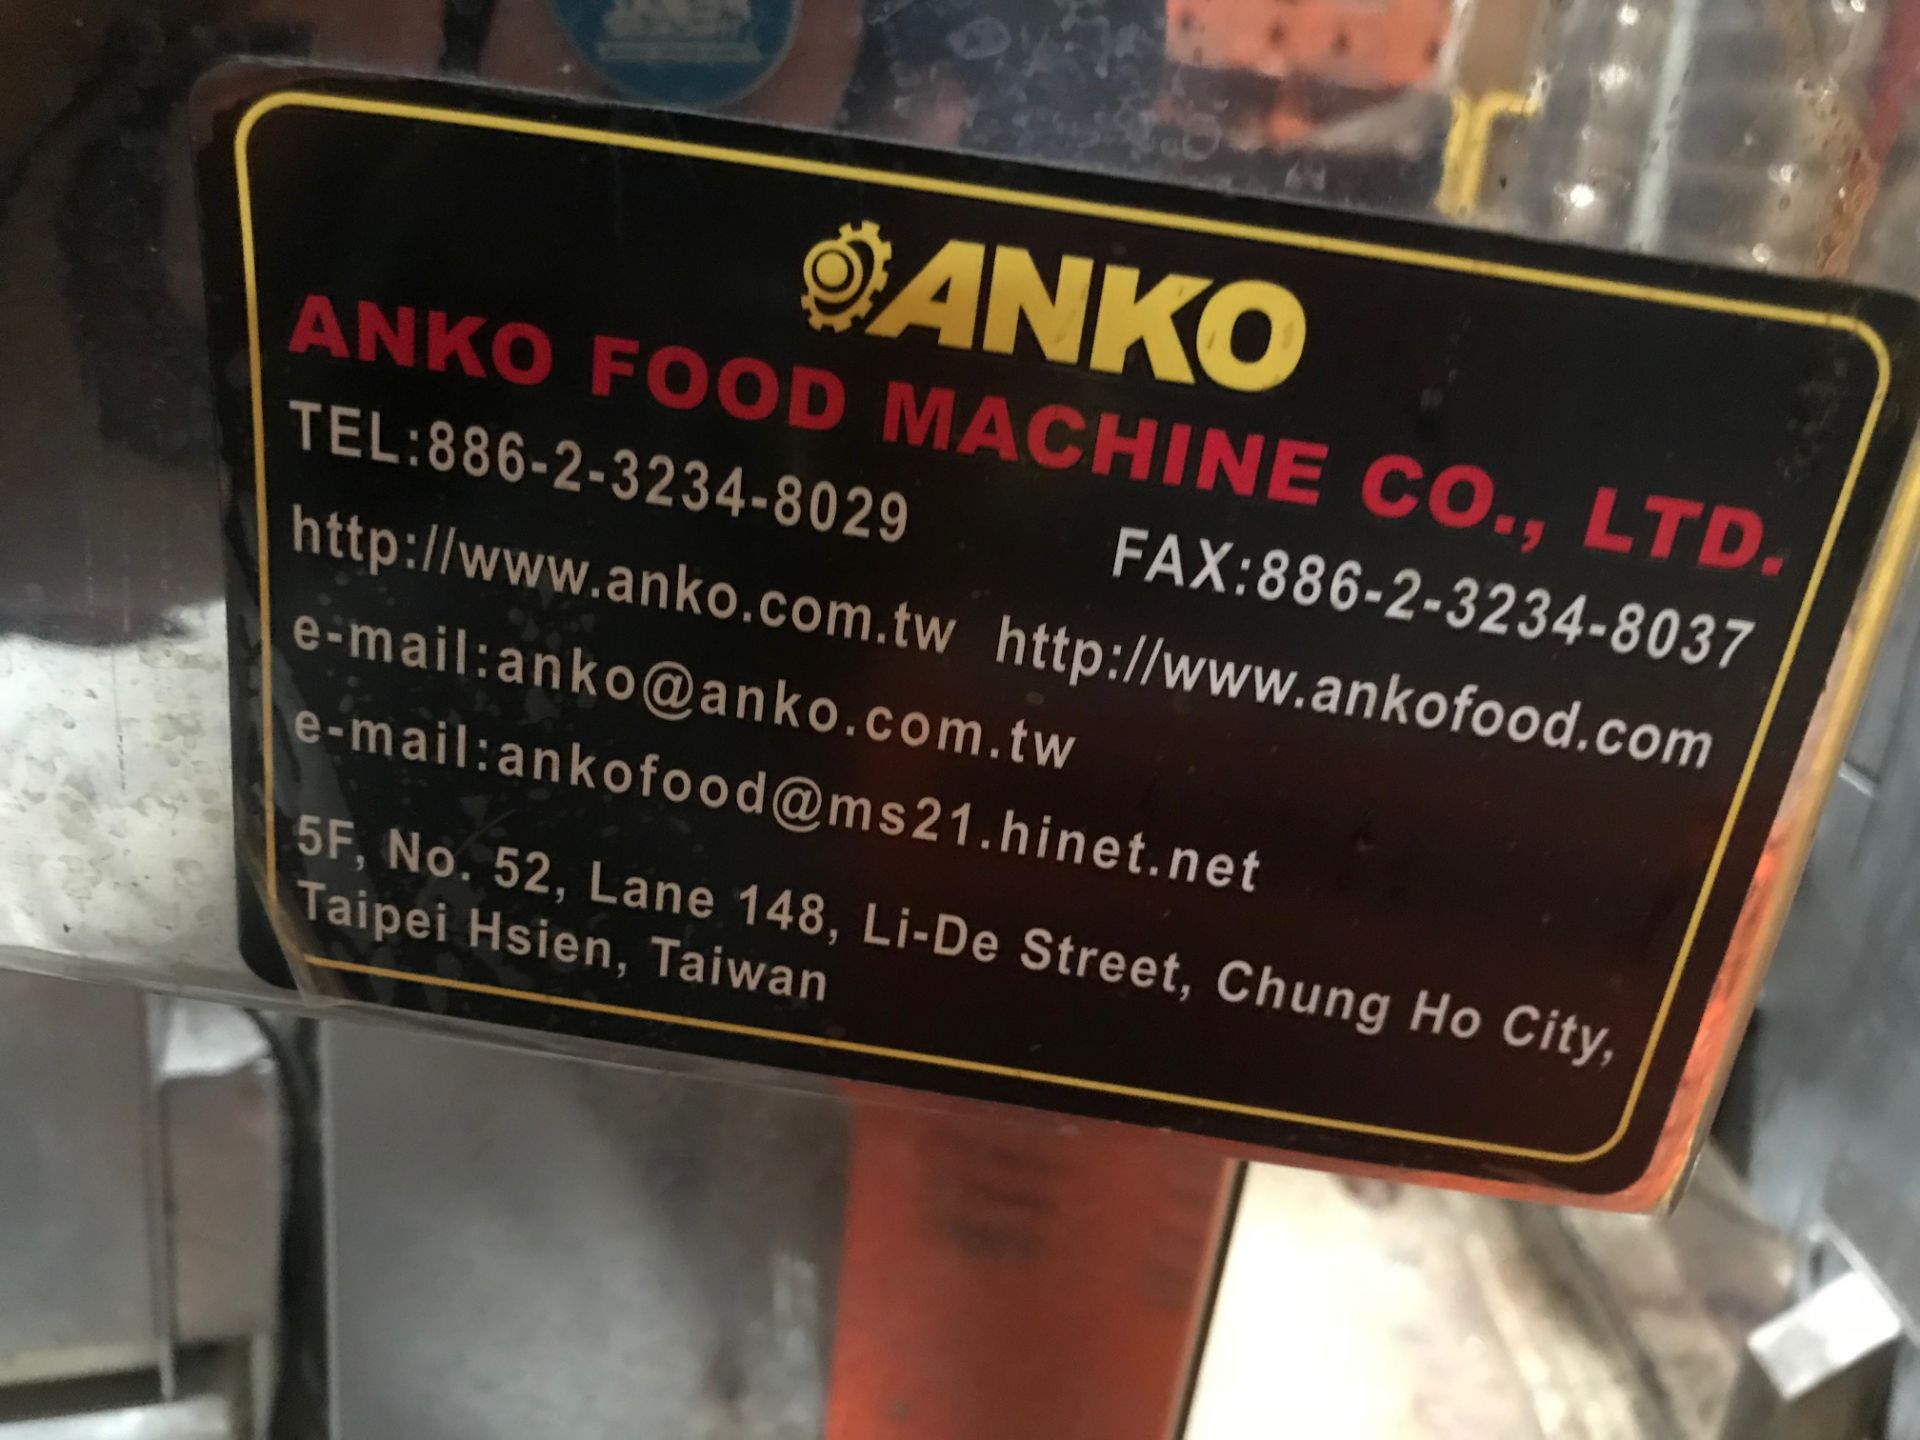 Anko Automatic Dough Sheeter, Model# ABS-220 - Image 5 of 6